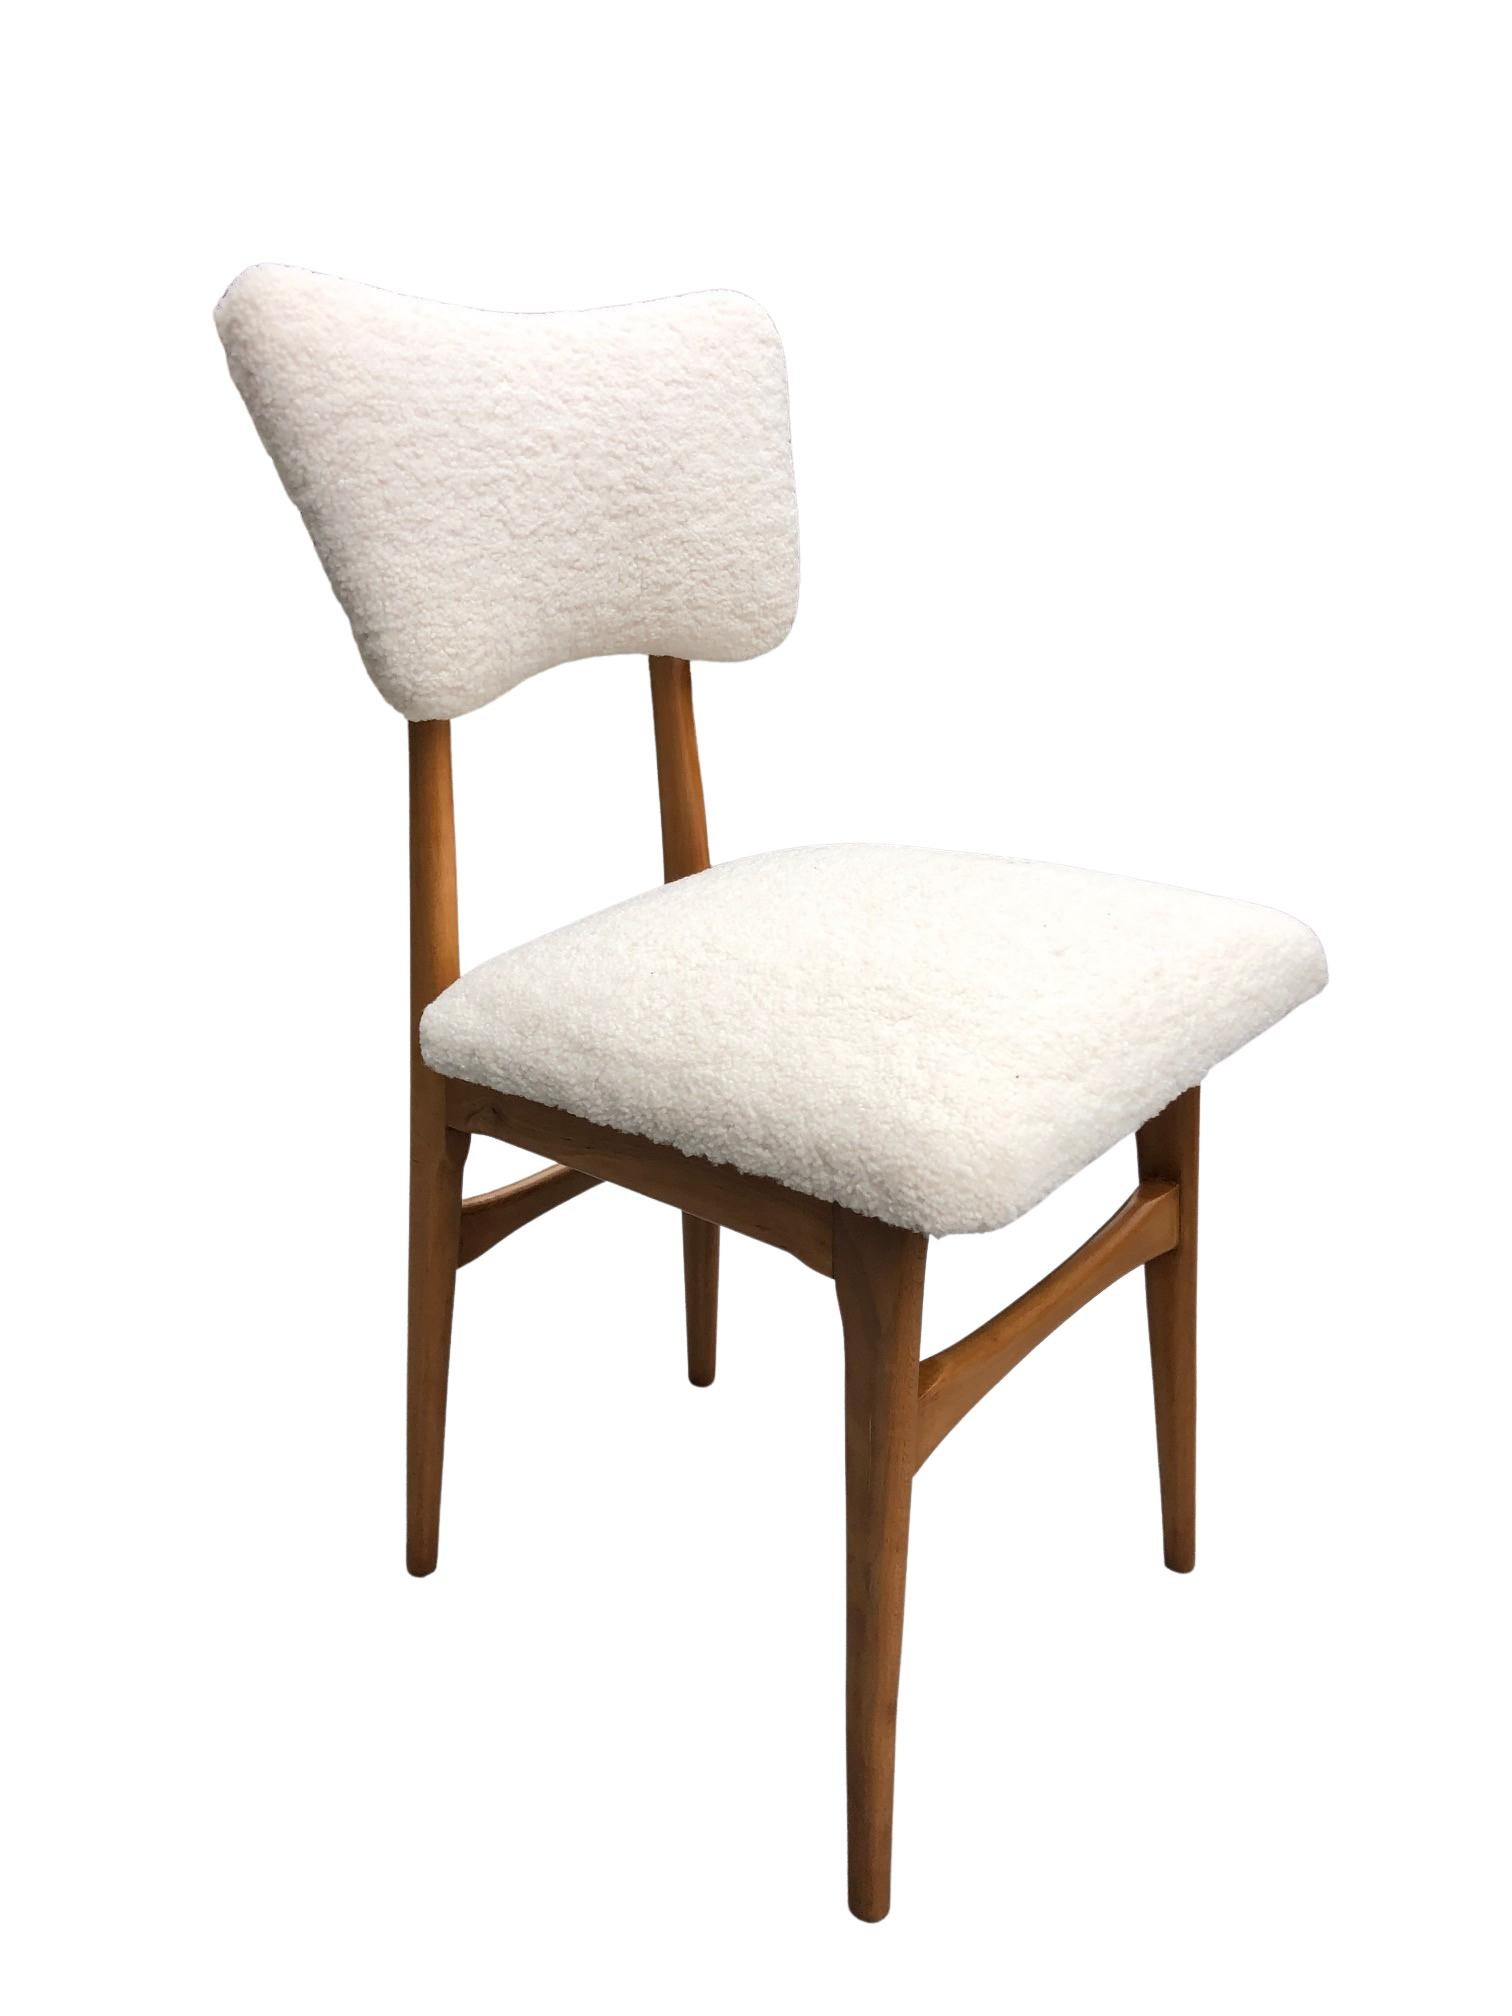 Midcentury Cream Bouclé and Wood Dining Chairs, Europe, 1960s, Set of Four For Sale 9